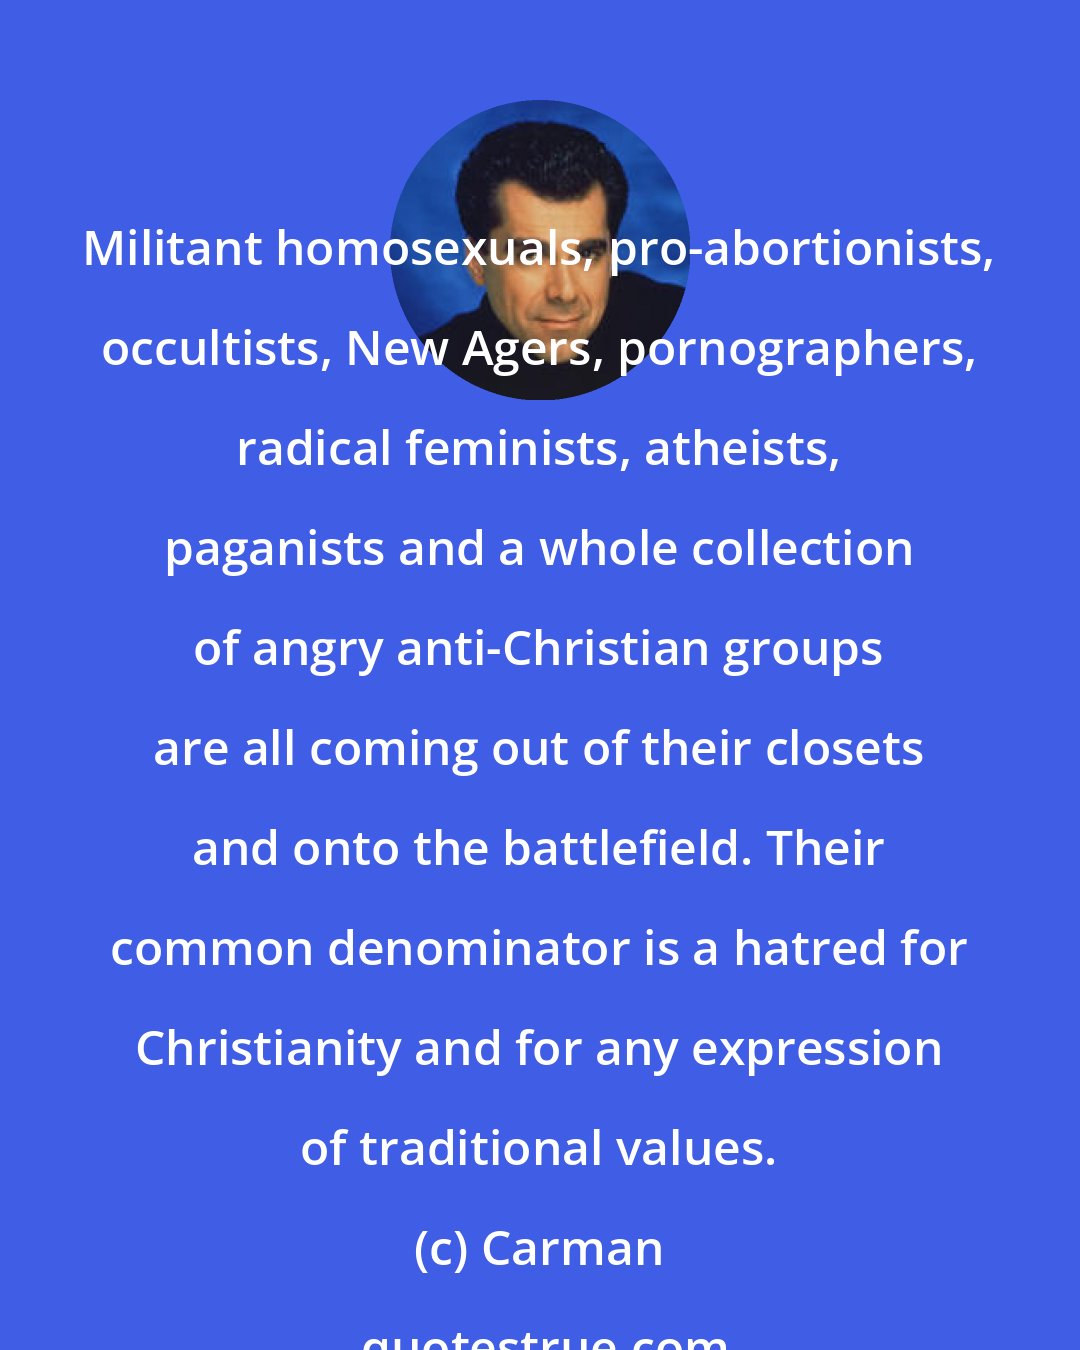 Carman: Militant homosexuals, pro-abortionists, occultists, New Agers, pornographers, radical feminists, atheists, paganists and a whole collection of angry anti-Christian groups are all coming out of their closets and onto the battlefield. Their common denominator is a hatred for Christianity and for any expression of traditional values.